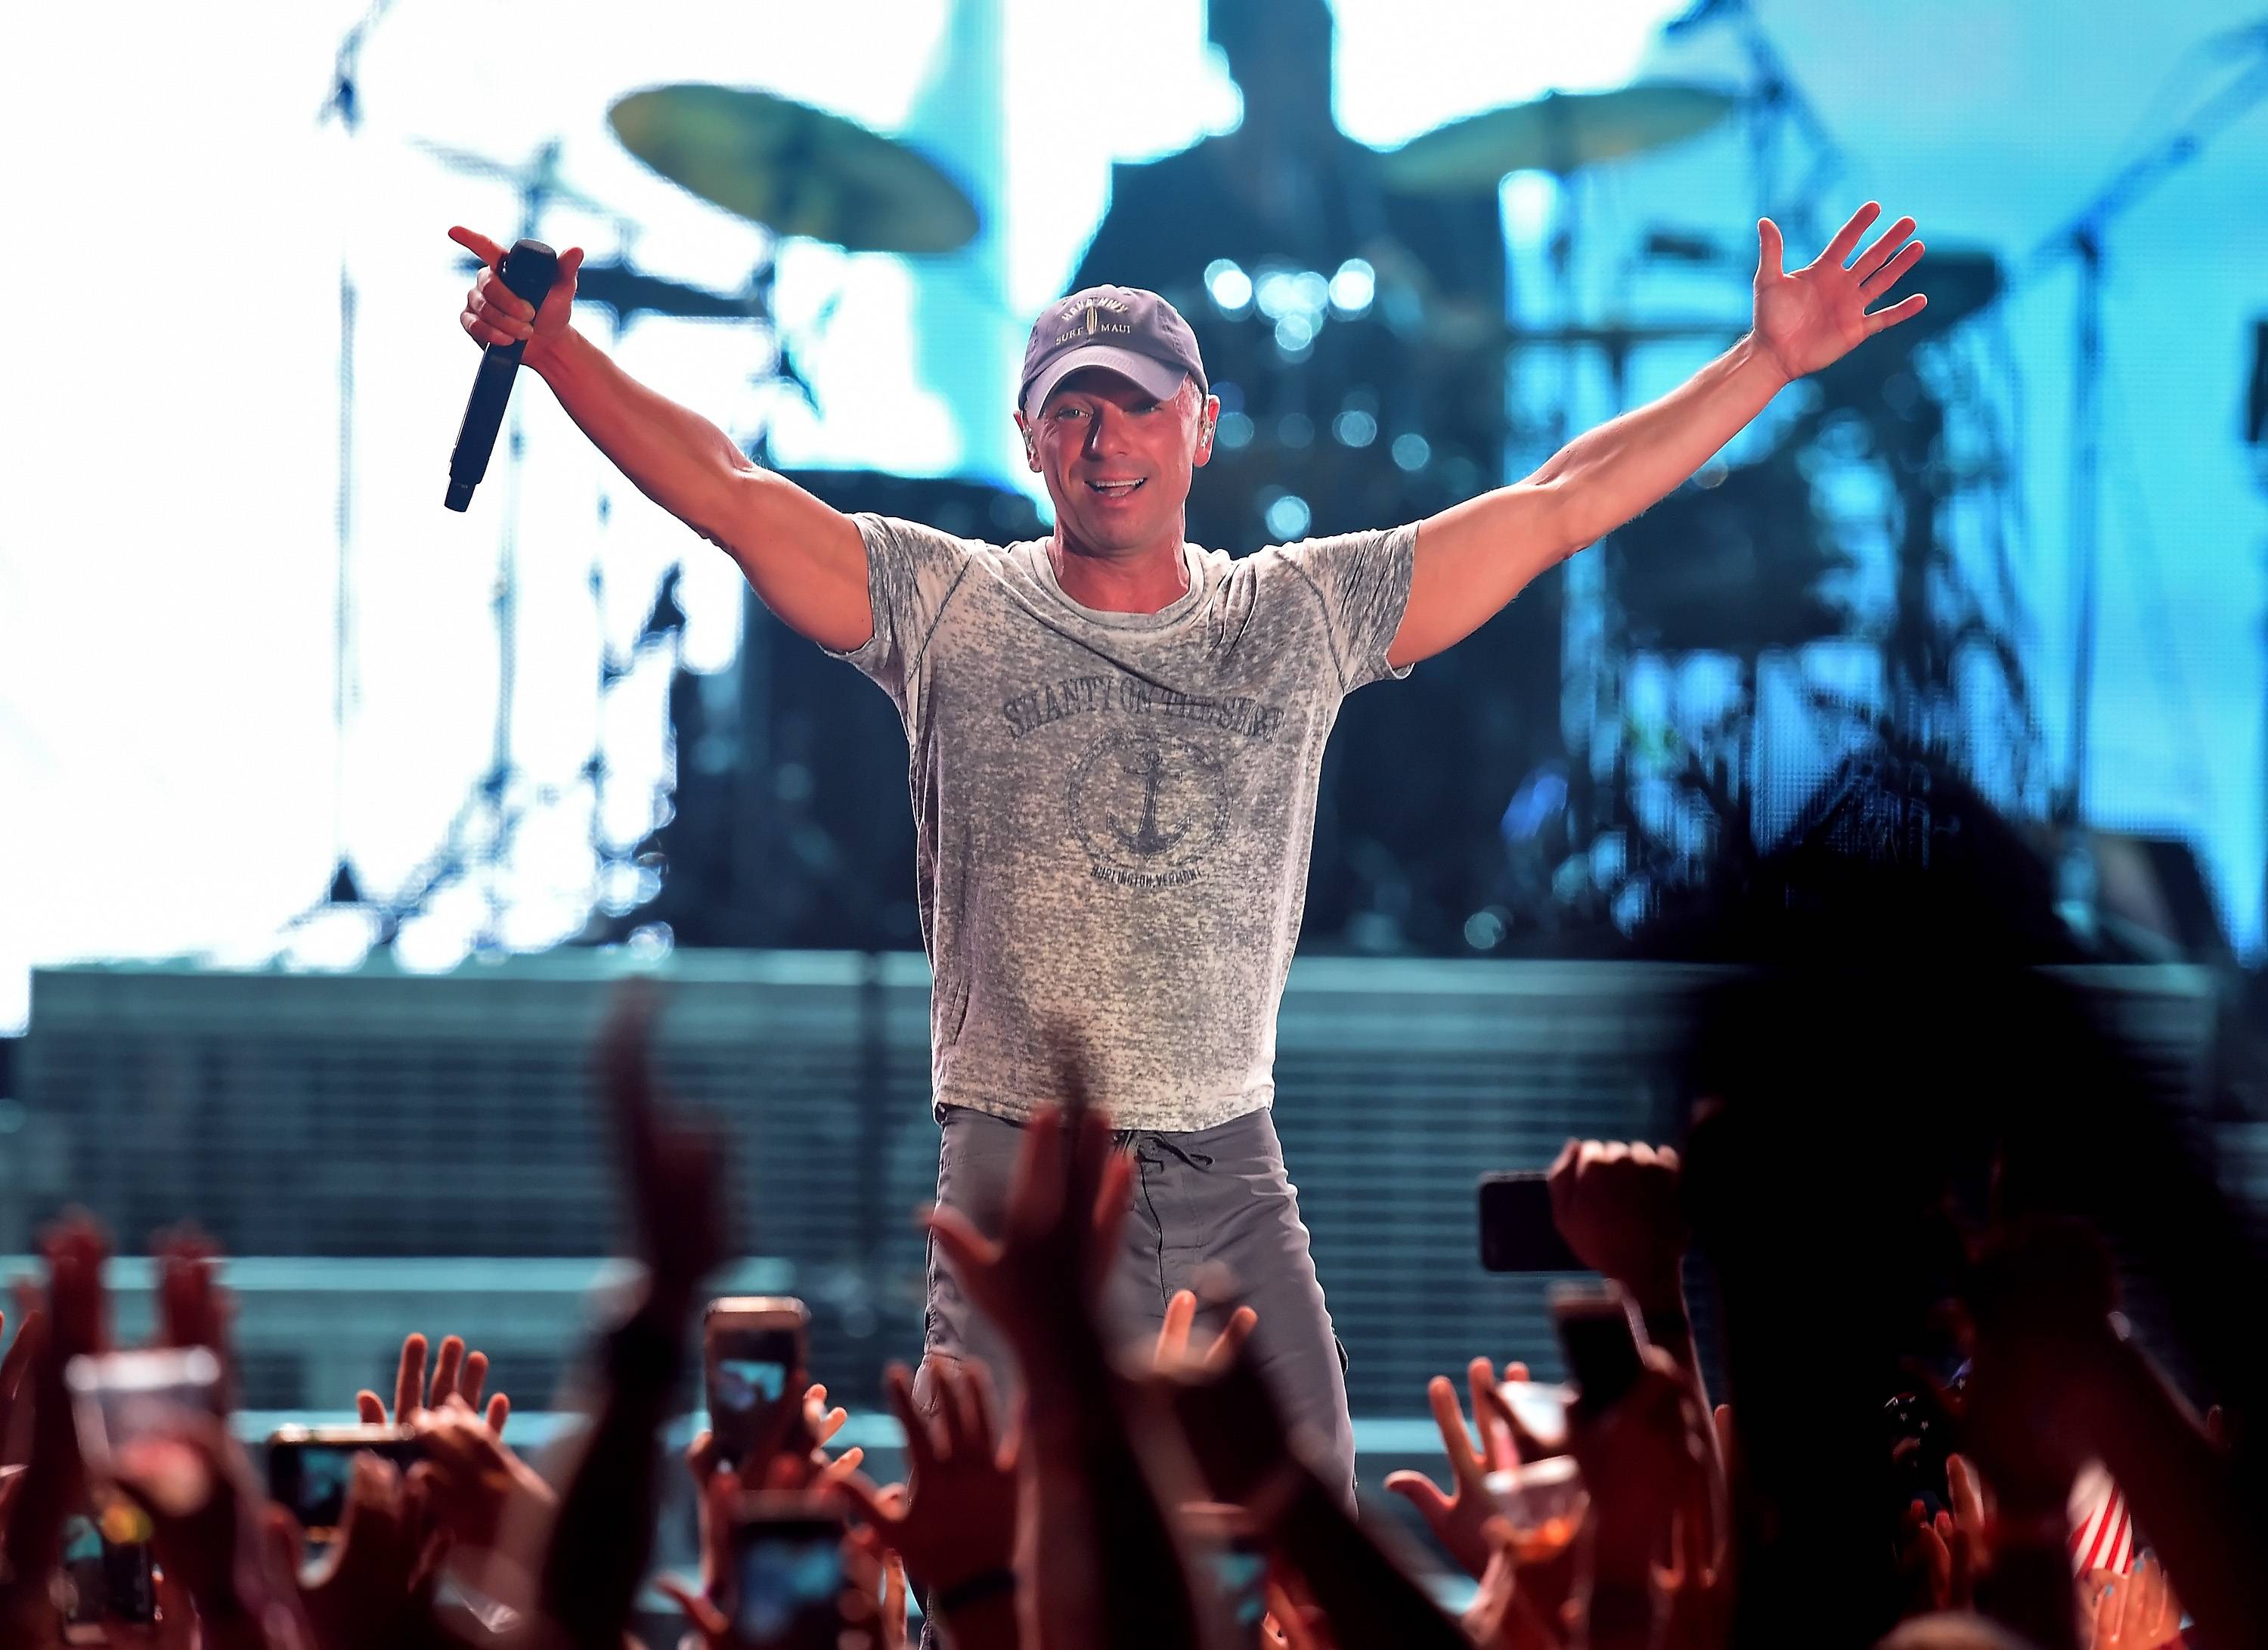 INDIO, CA - APRIL 30: Singer Kenny Chesney performs on the Toyota Mane Stage during day 3 of 2017 Stagecoach California's Country Music Festival at the Empire Polo Club on April 30, 2017 in Indio, California. 